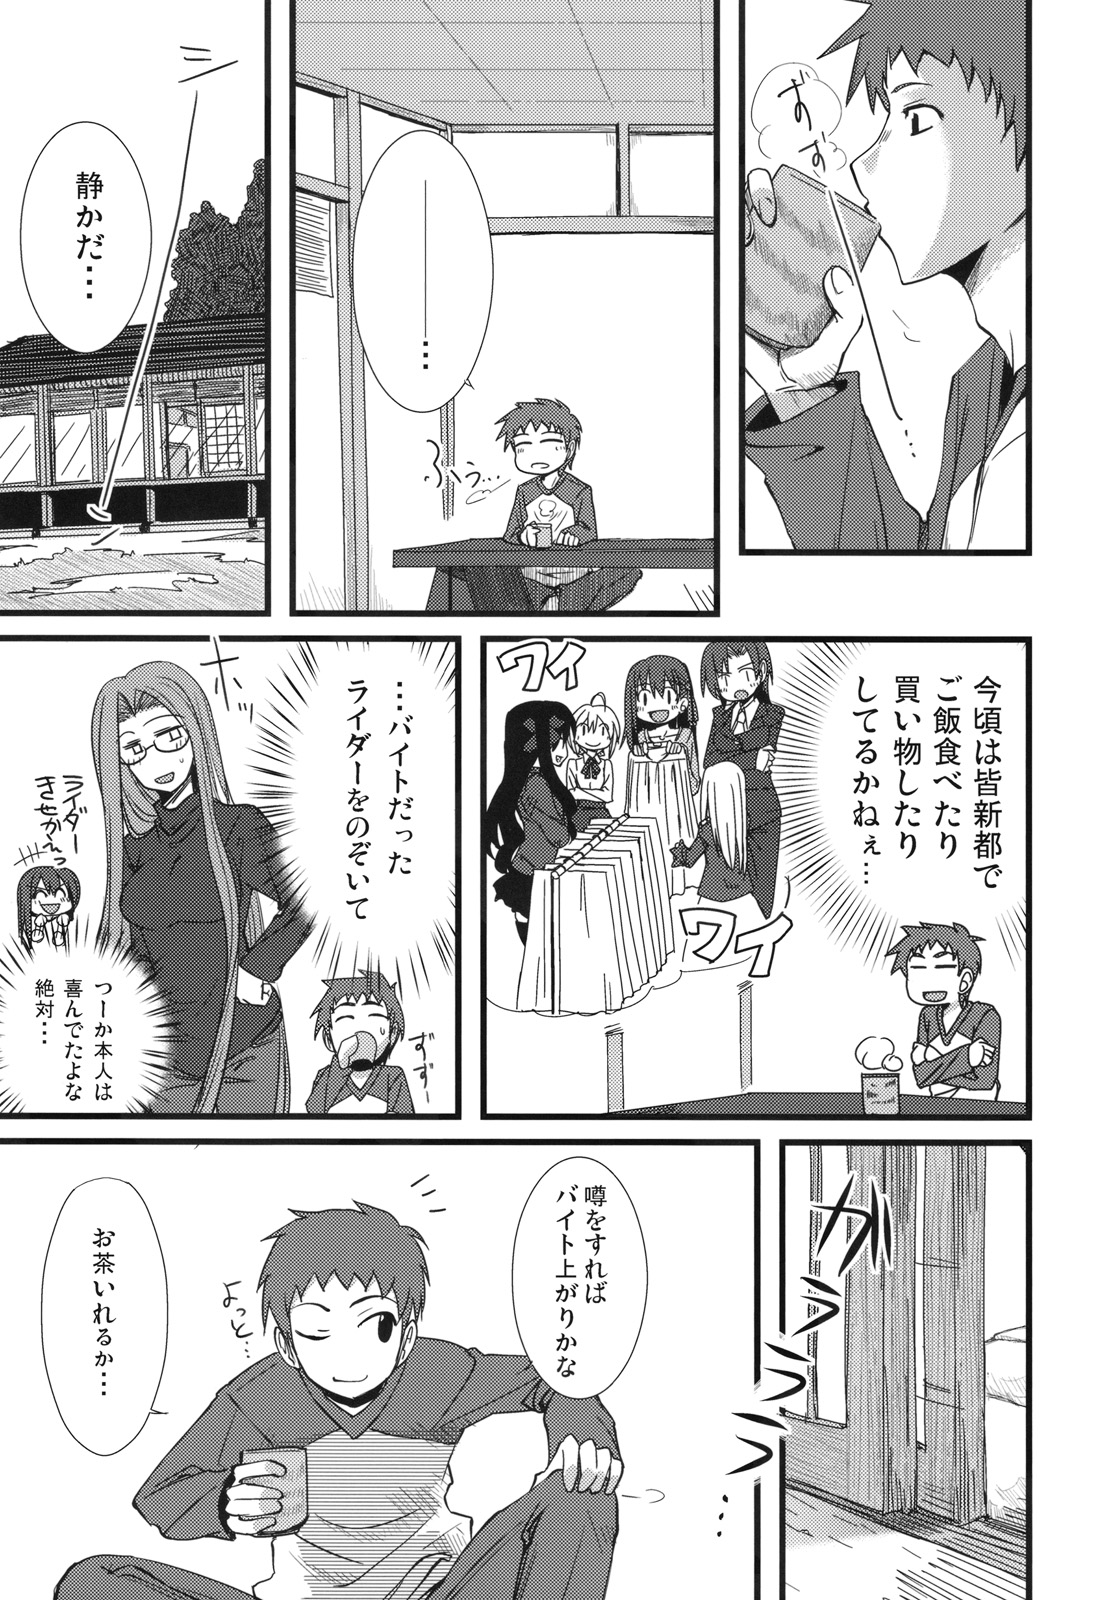 (SC46) [Ronpaia (Fue)] Chihadame. (Fate/Stay Night) page 8 full